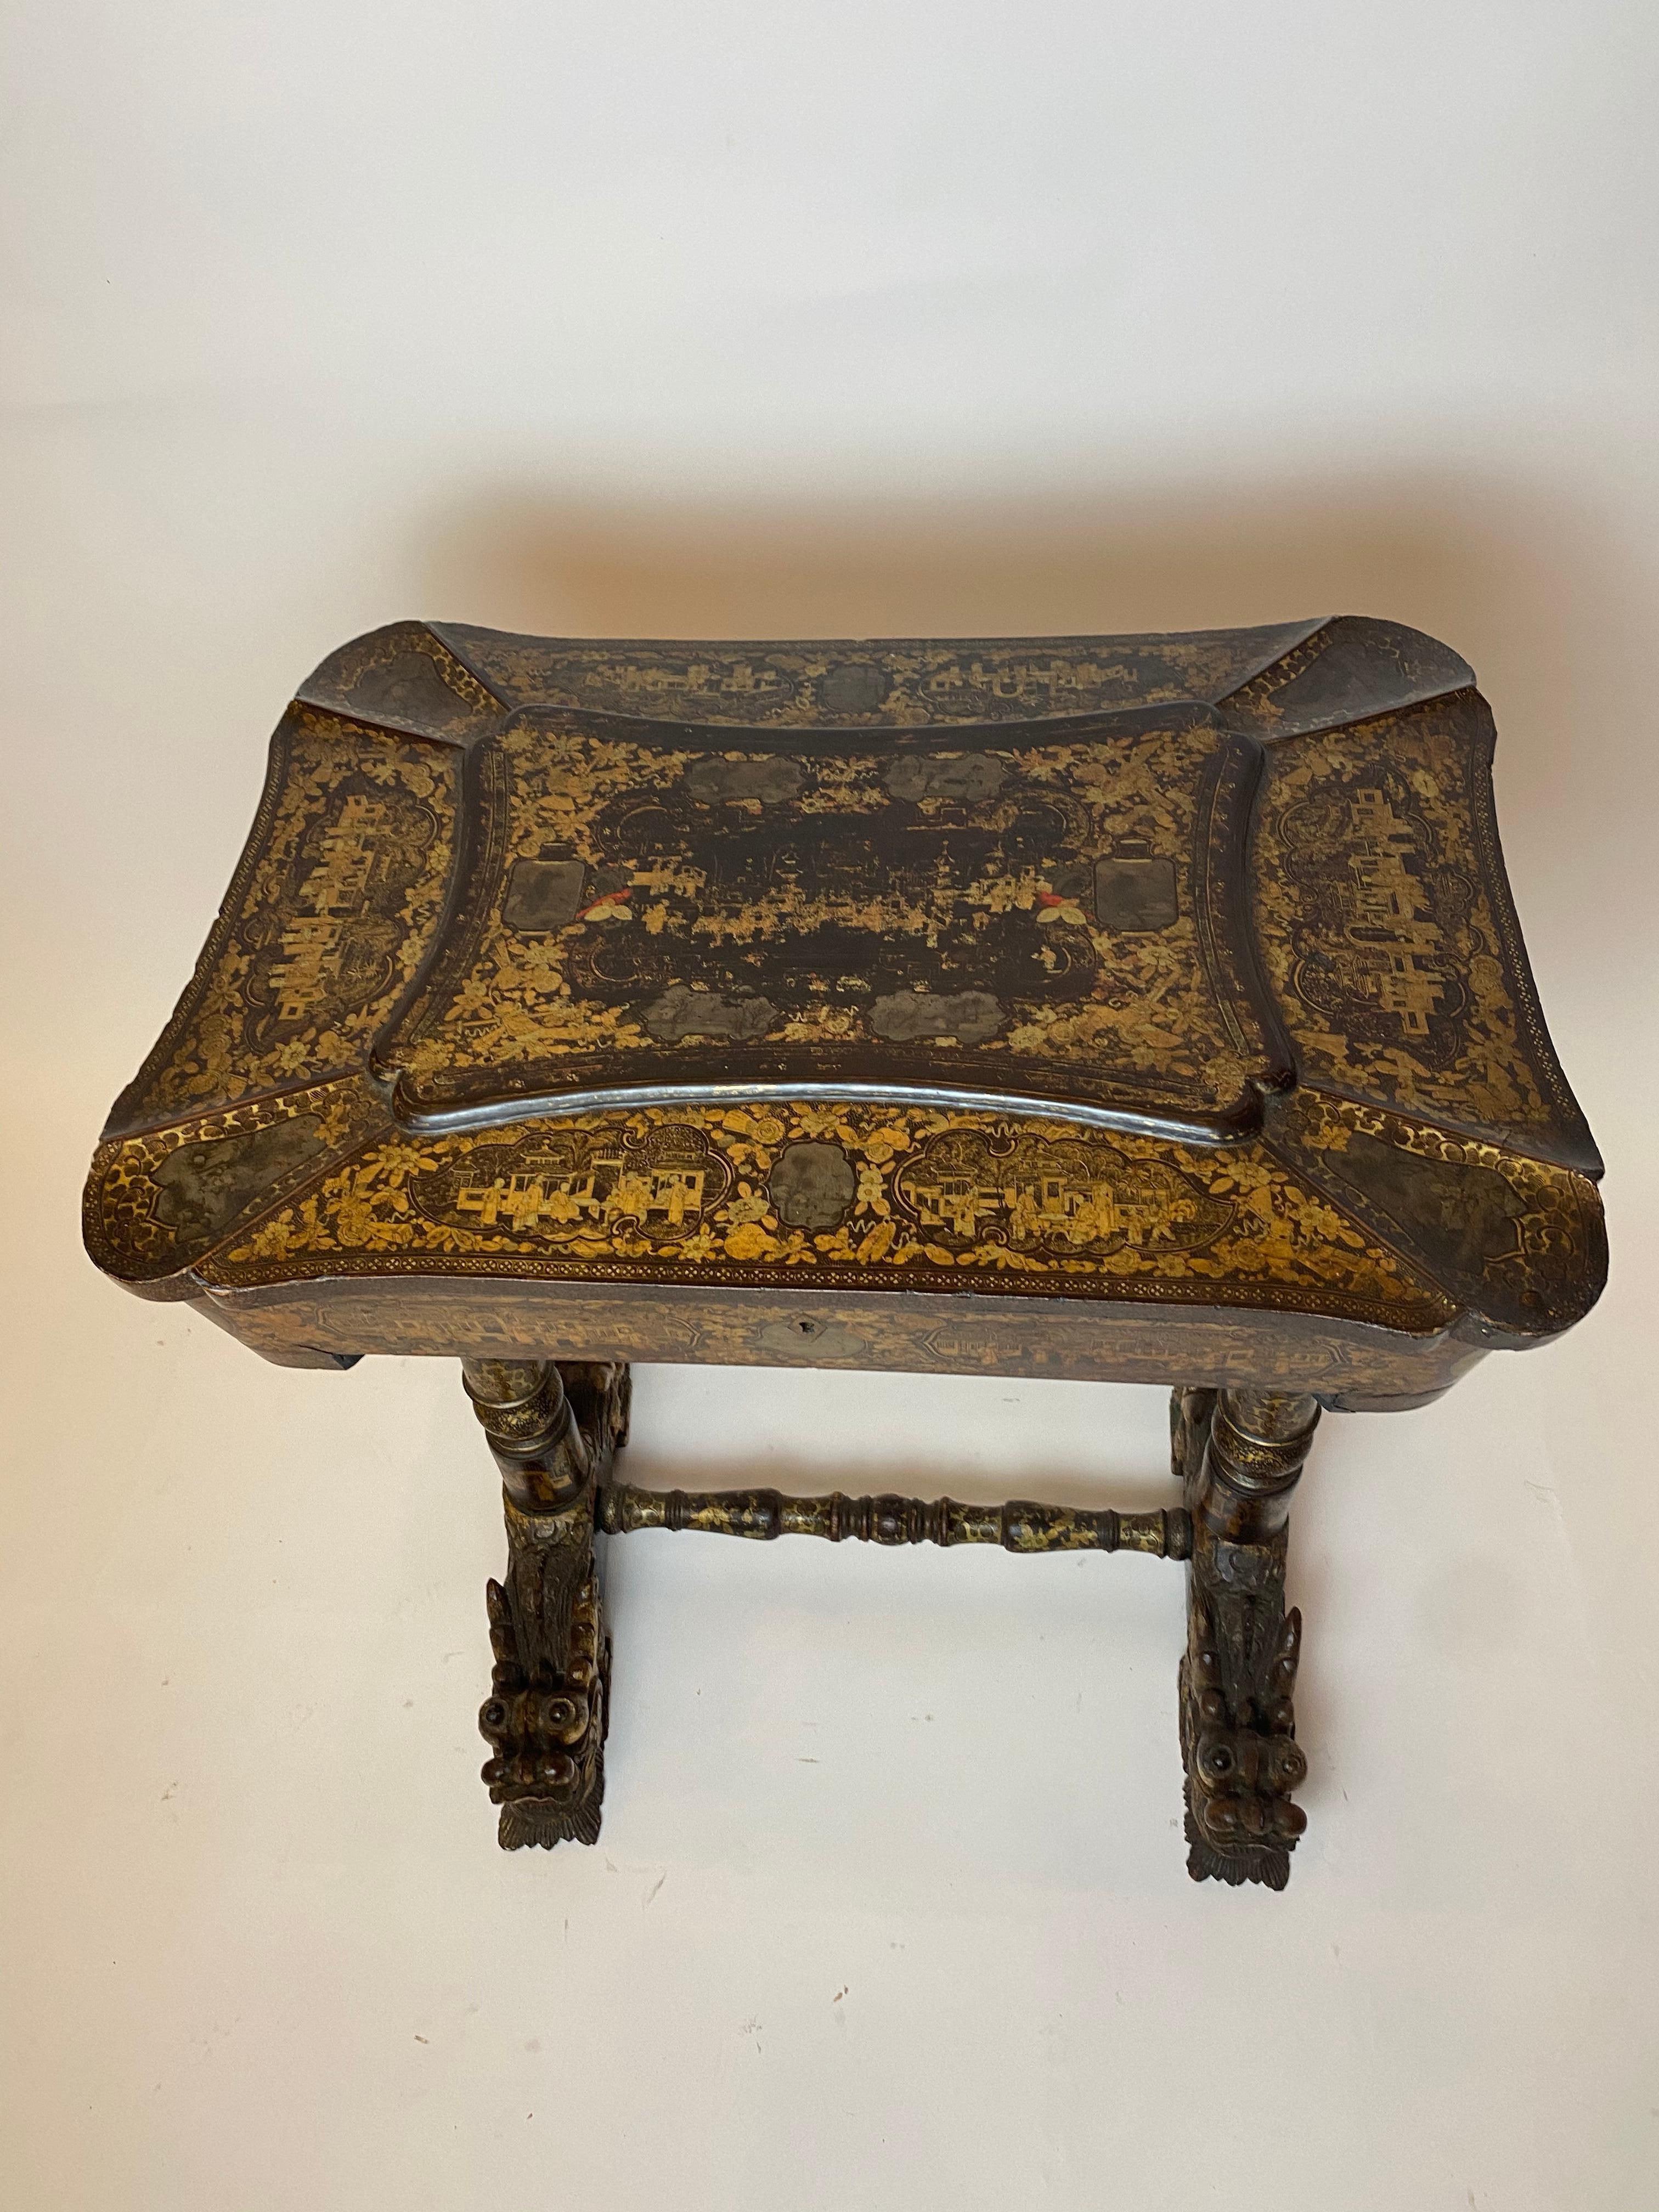 Early 19th century Chinese export lacquer and gilt work table from the Qing Dynasty, with carved gilt dragon head feet, with the table of canted rectangular form, with moulded top, the entire finely decorated with the typical figural landscape and